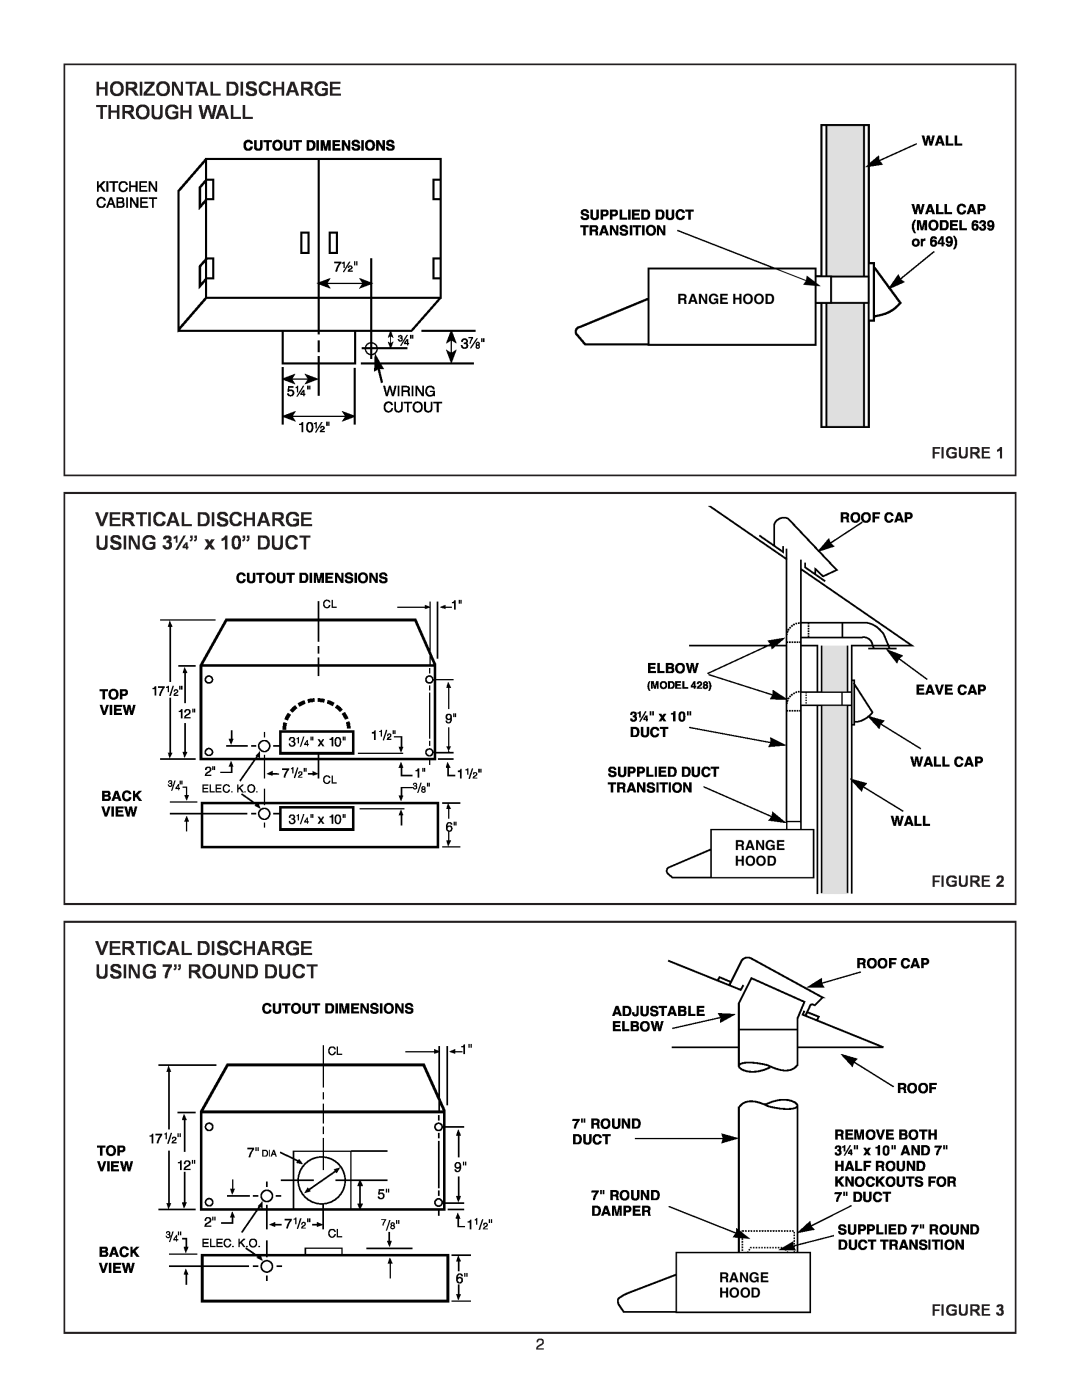 Broan QT230WW installation instructions Horizontal Discharge Through Wall, VERTICAL DISCHARGE USING 3¼” x 10” DUCT, Figure 